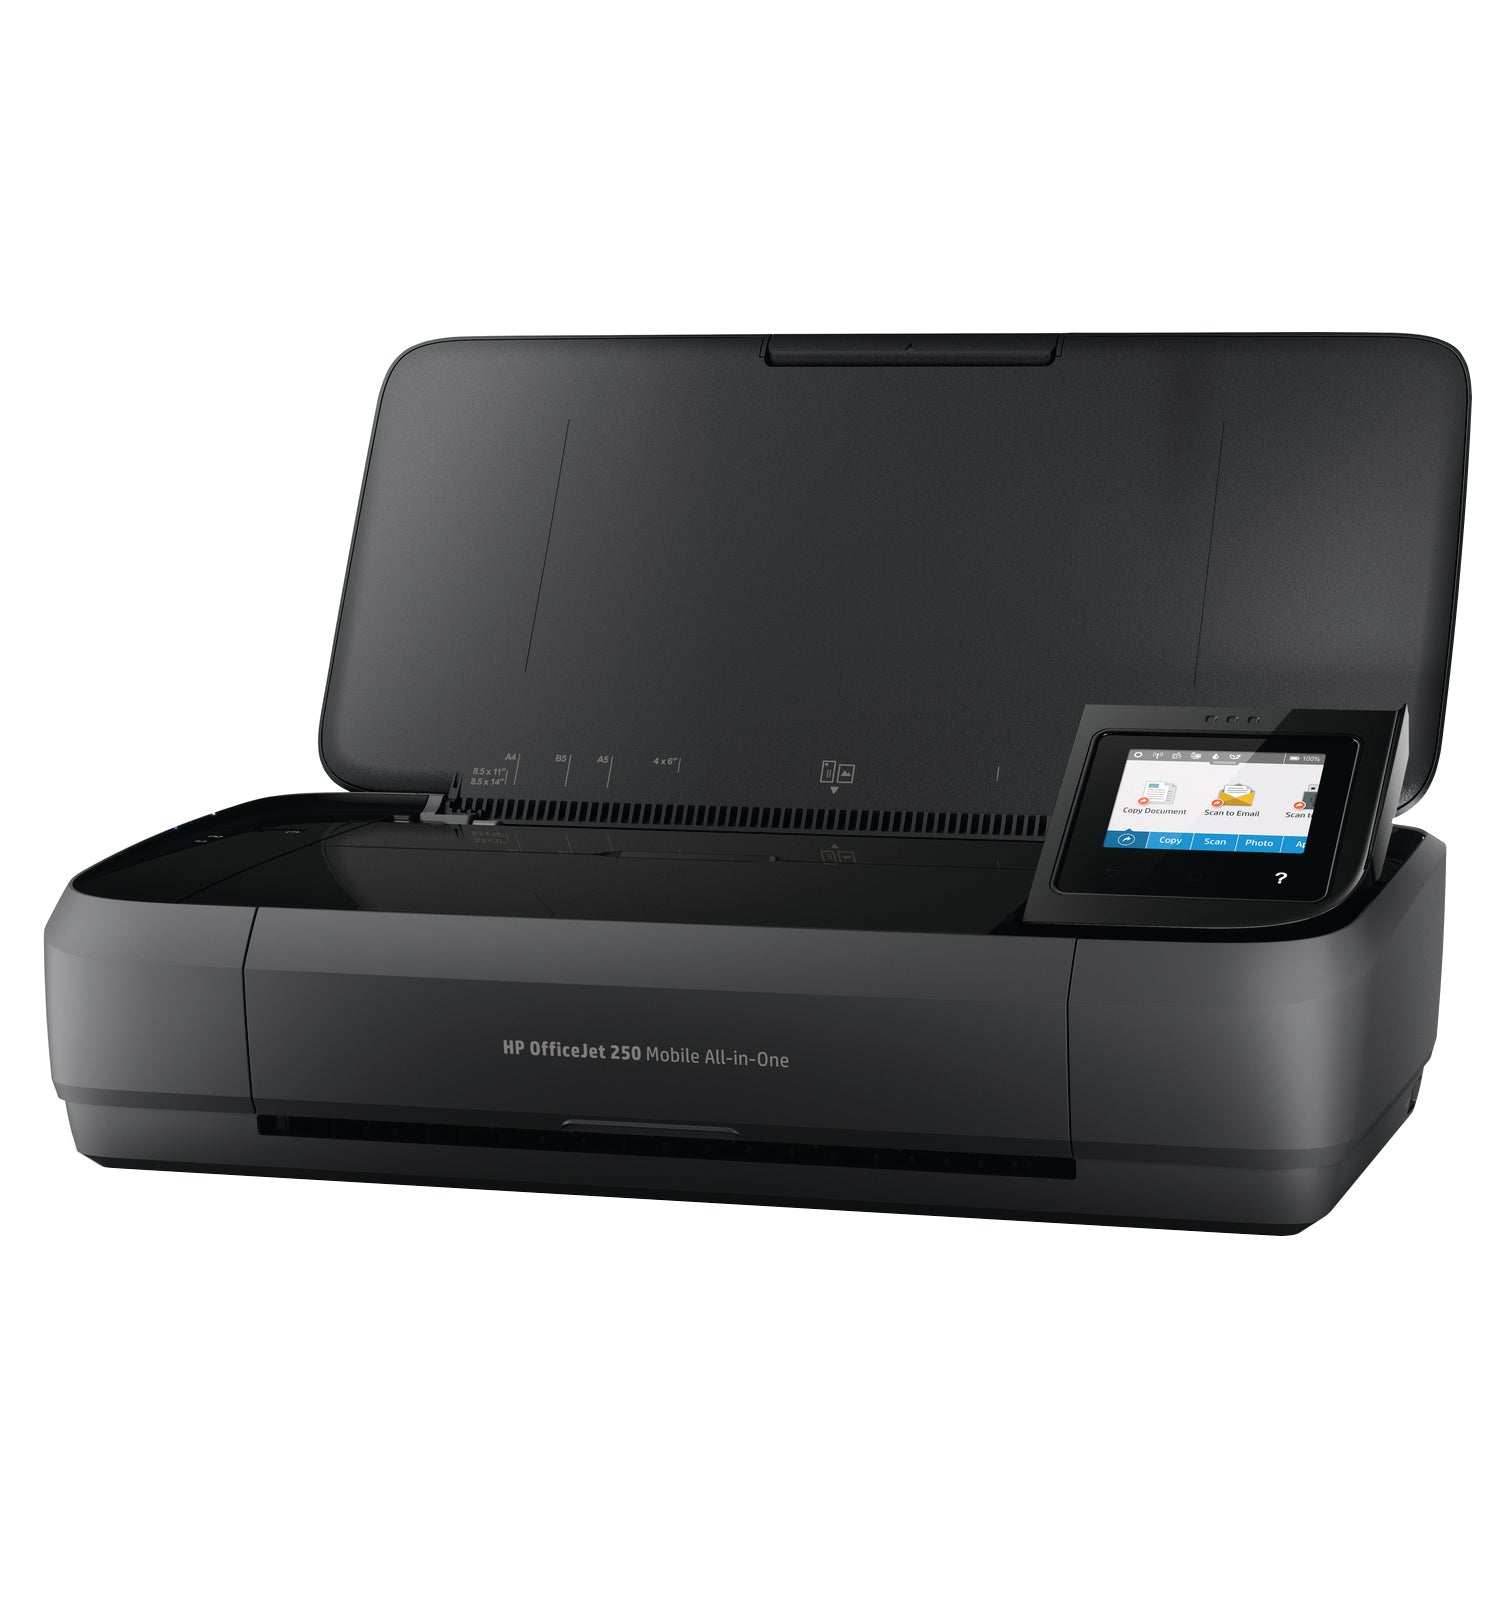 Hp Officejet 250 Mobile All In One Printer Black Cz992a 3739